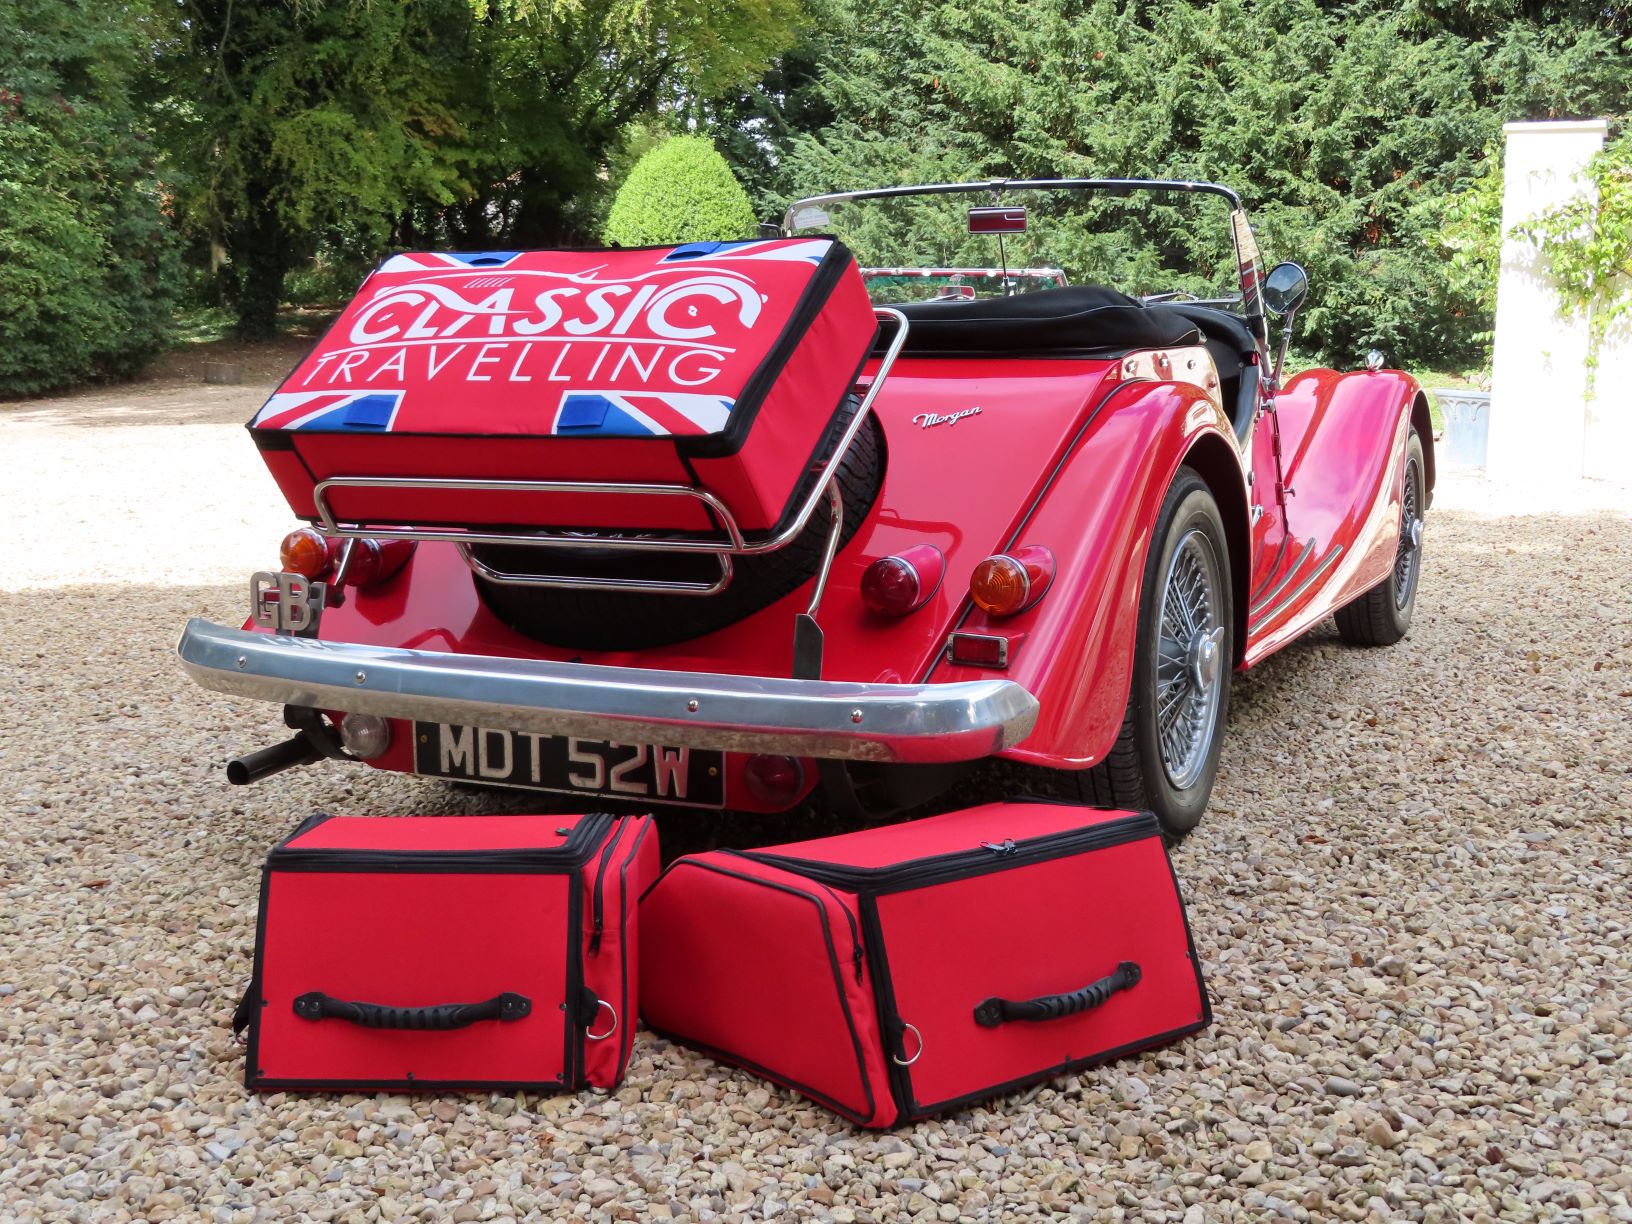 Travel bags tailored for your car - Car-Bags.com